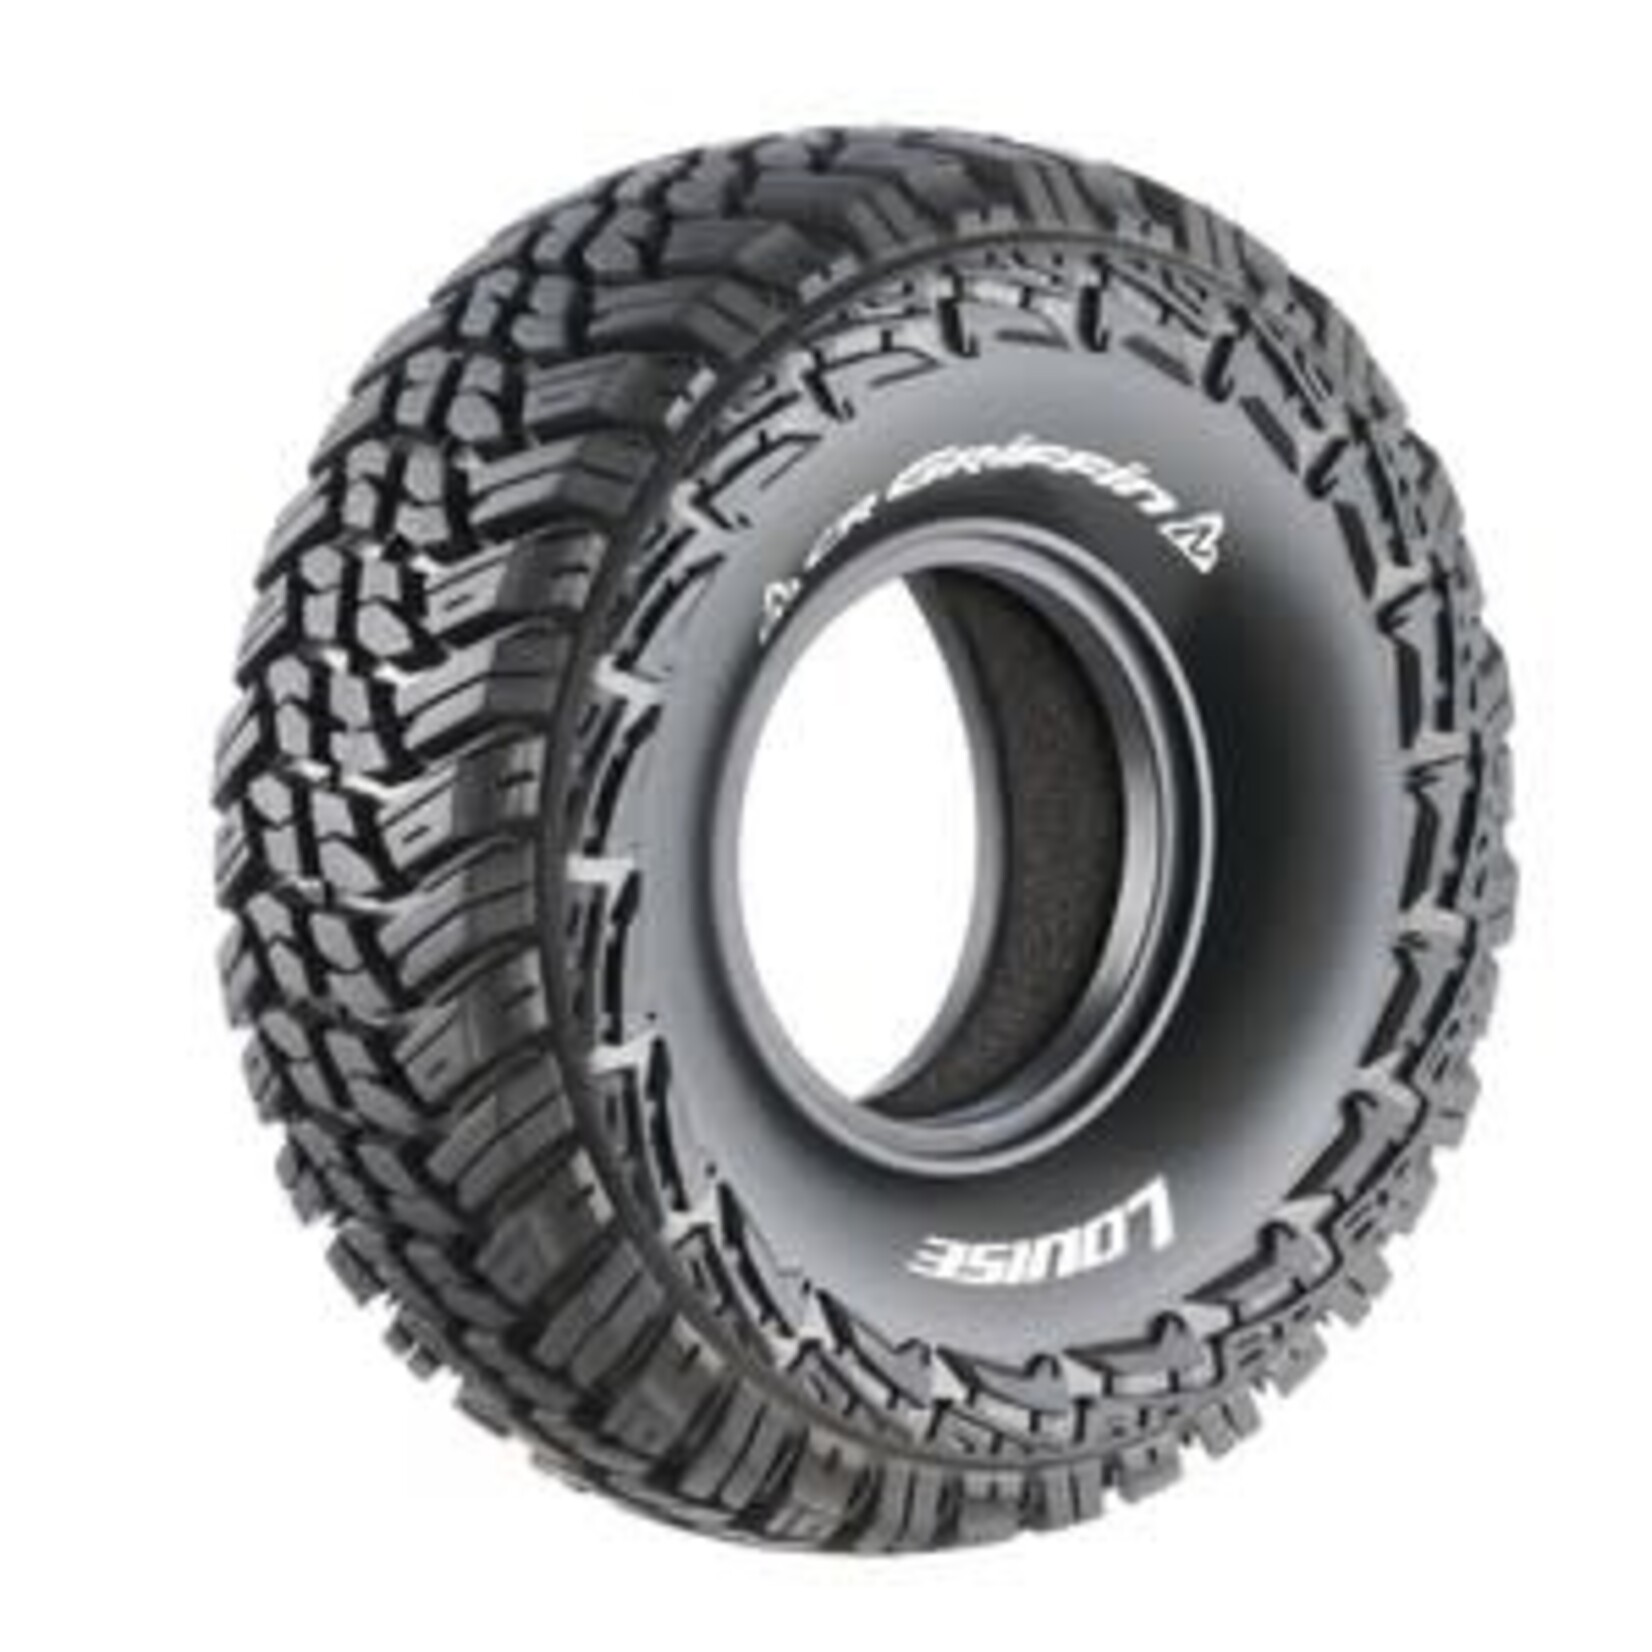 Louise RC CR-Griffin 1/10 1.9" Crawler Tires, Super Soft, Front/Rear (2)